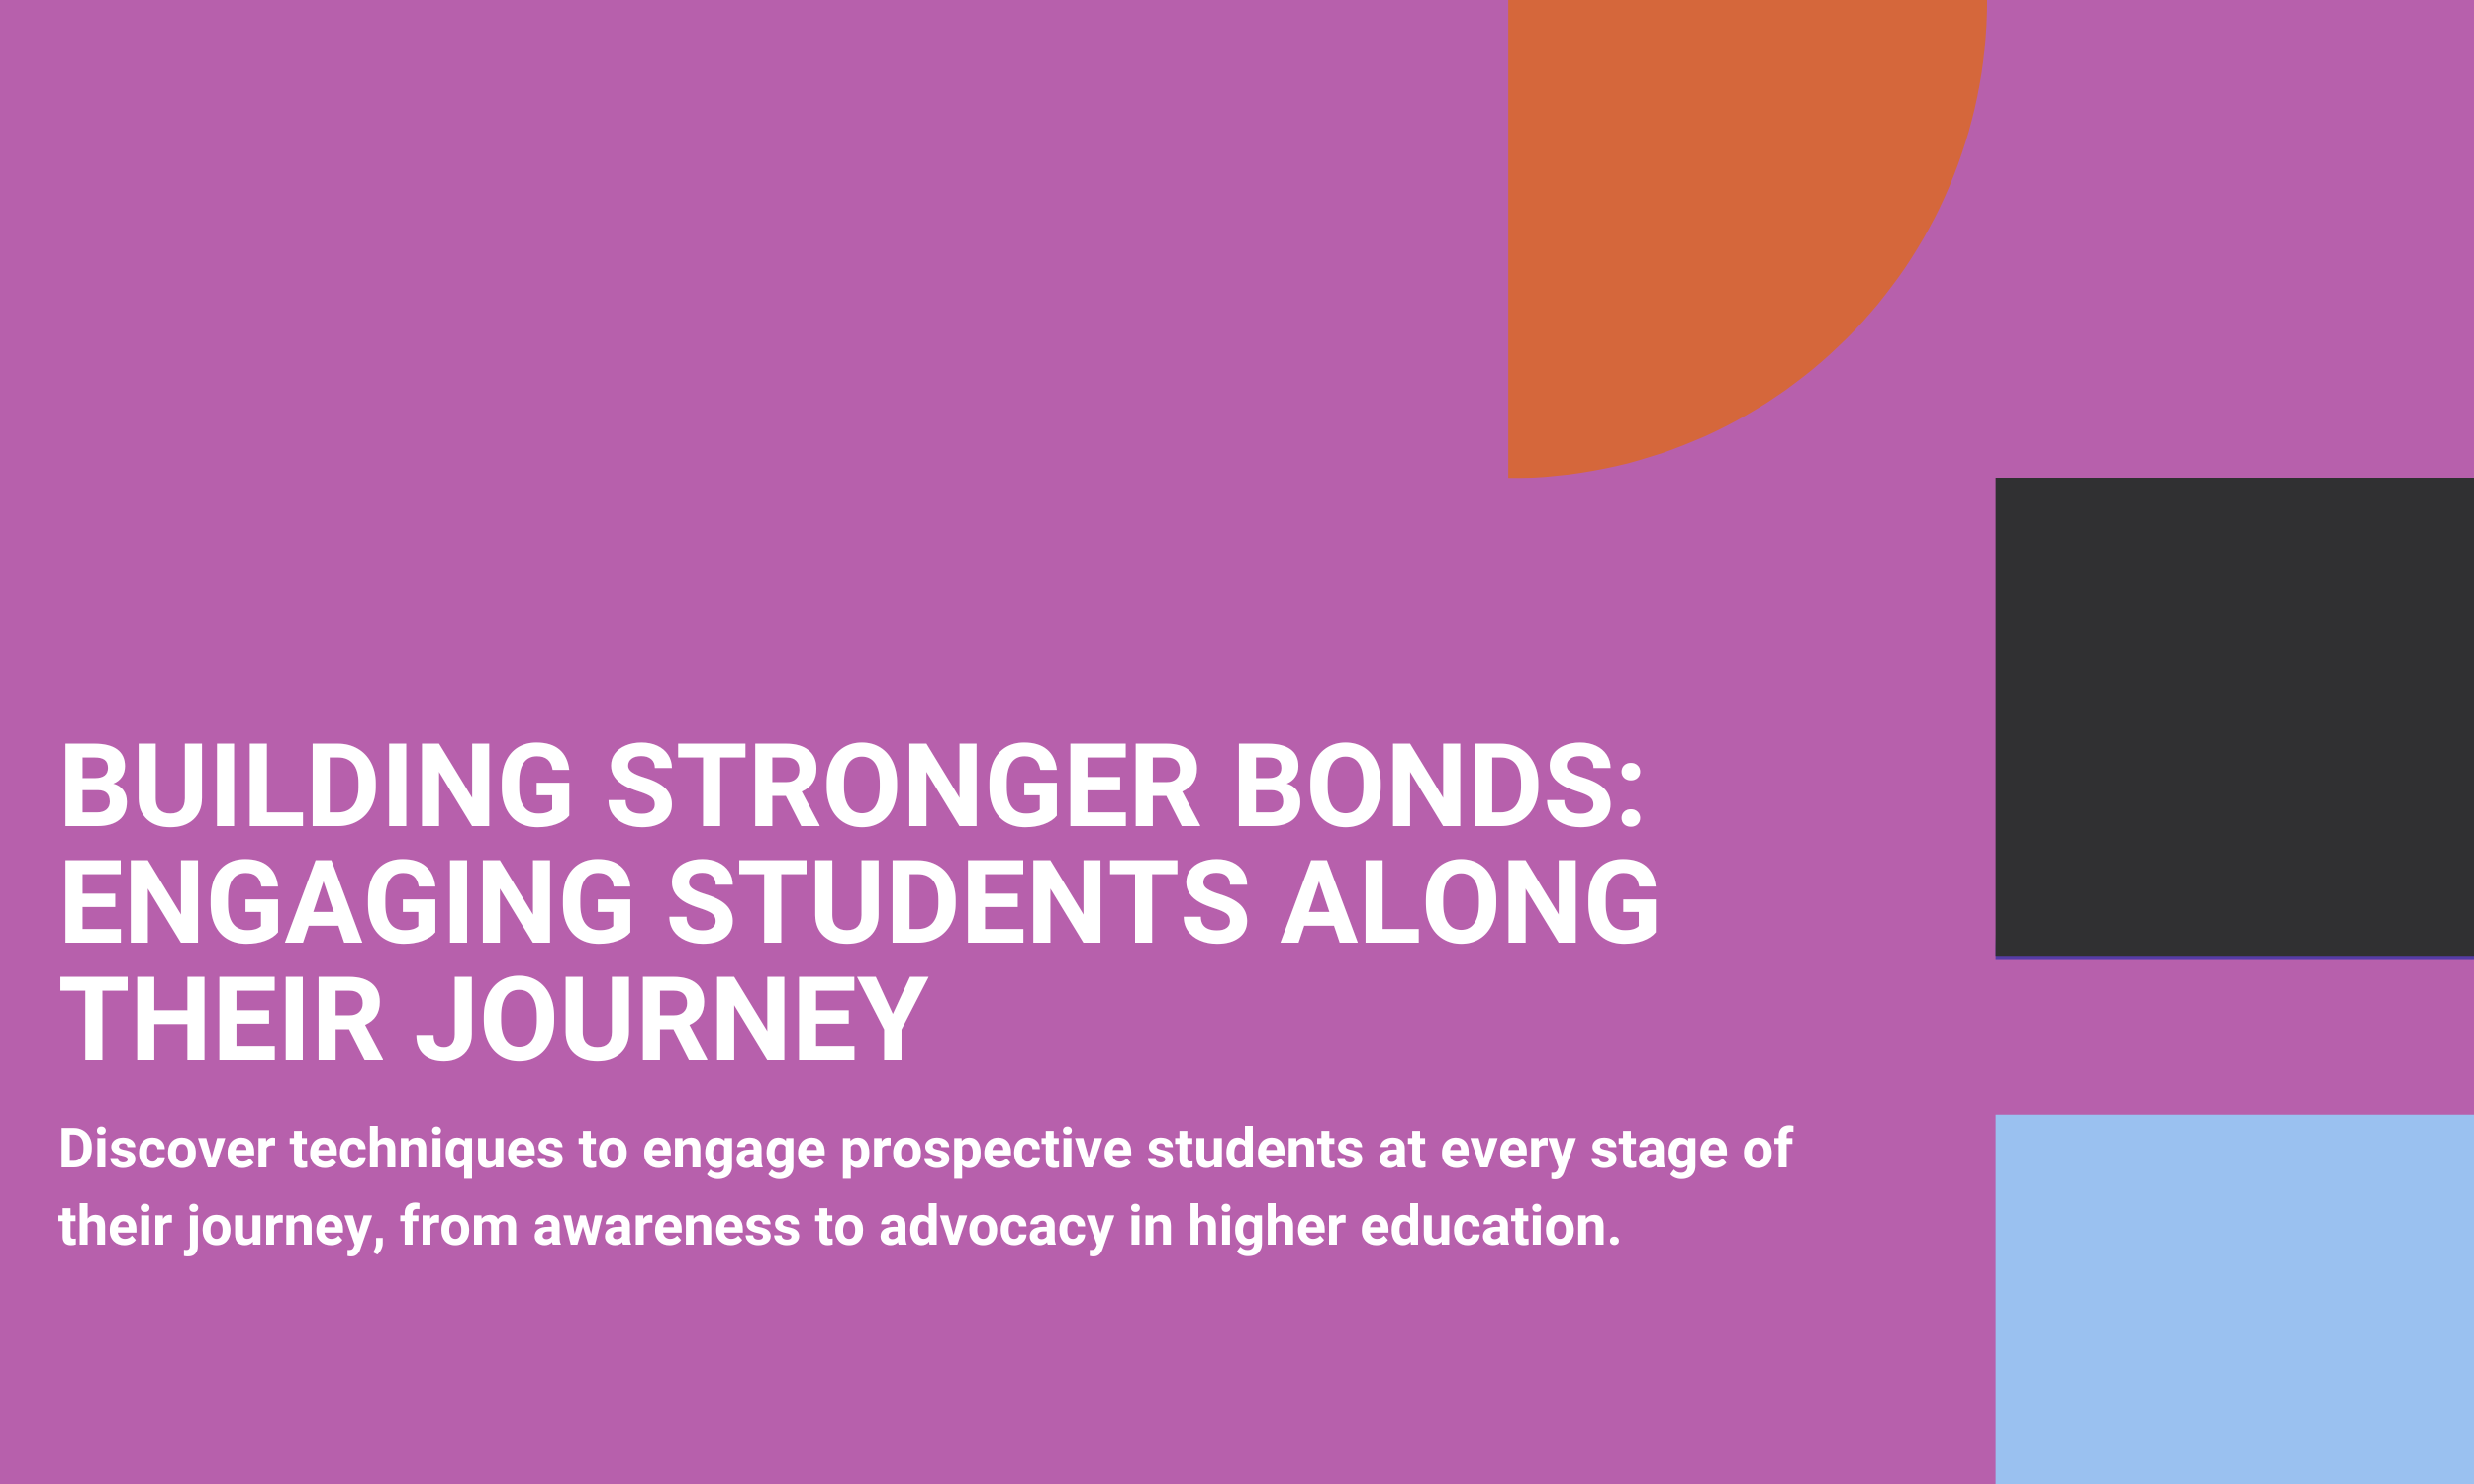 Building Stronger Bonds: Engaging Students Along Their Journey